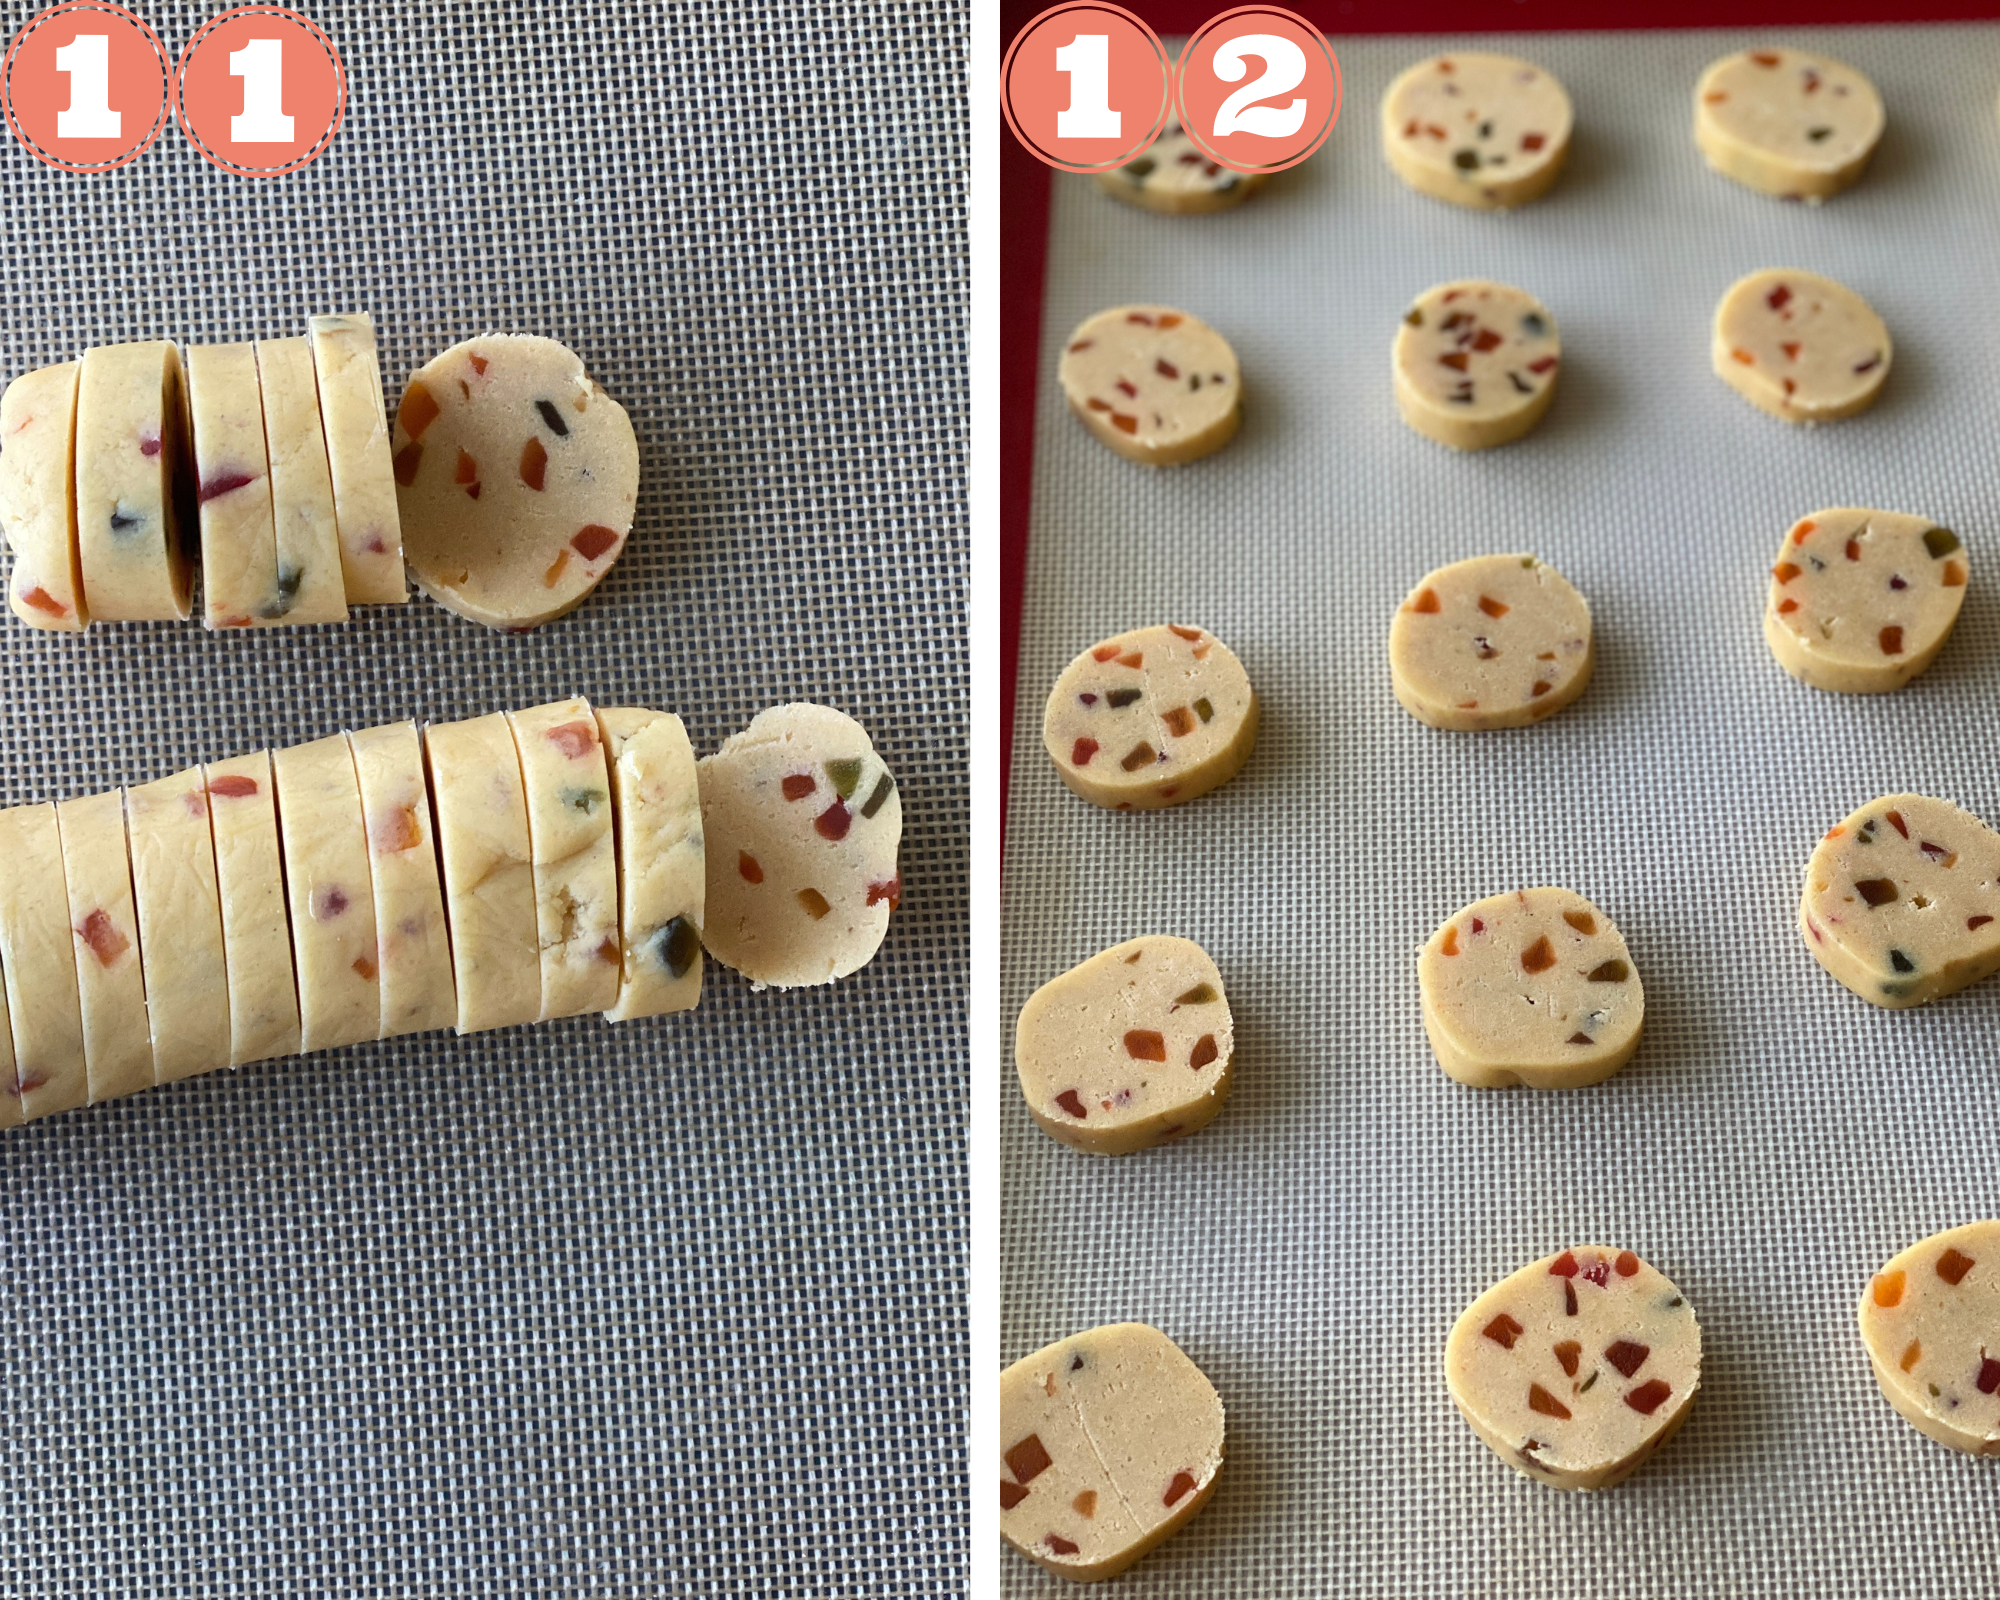 Collage steps to make Karachi biscuits; cut into discs and arrange to bake. 